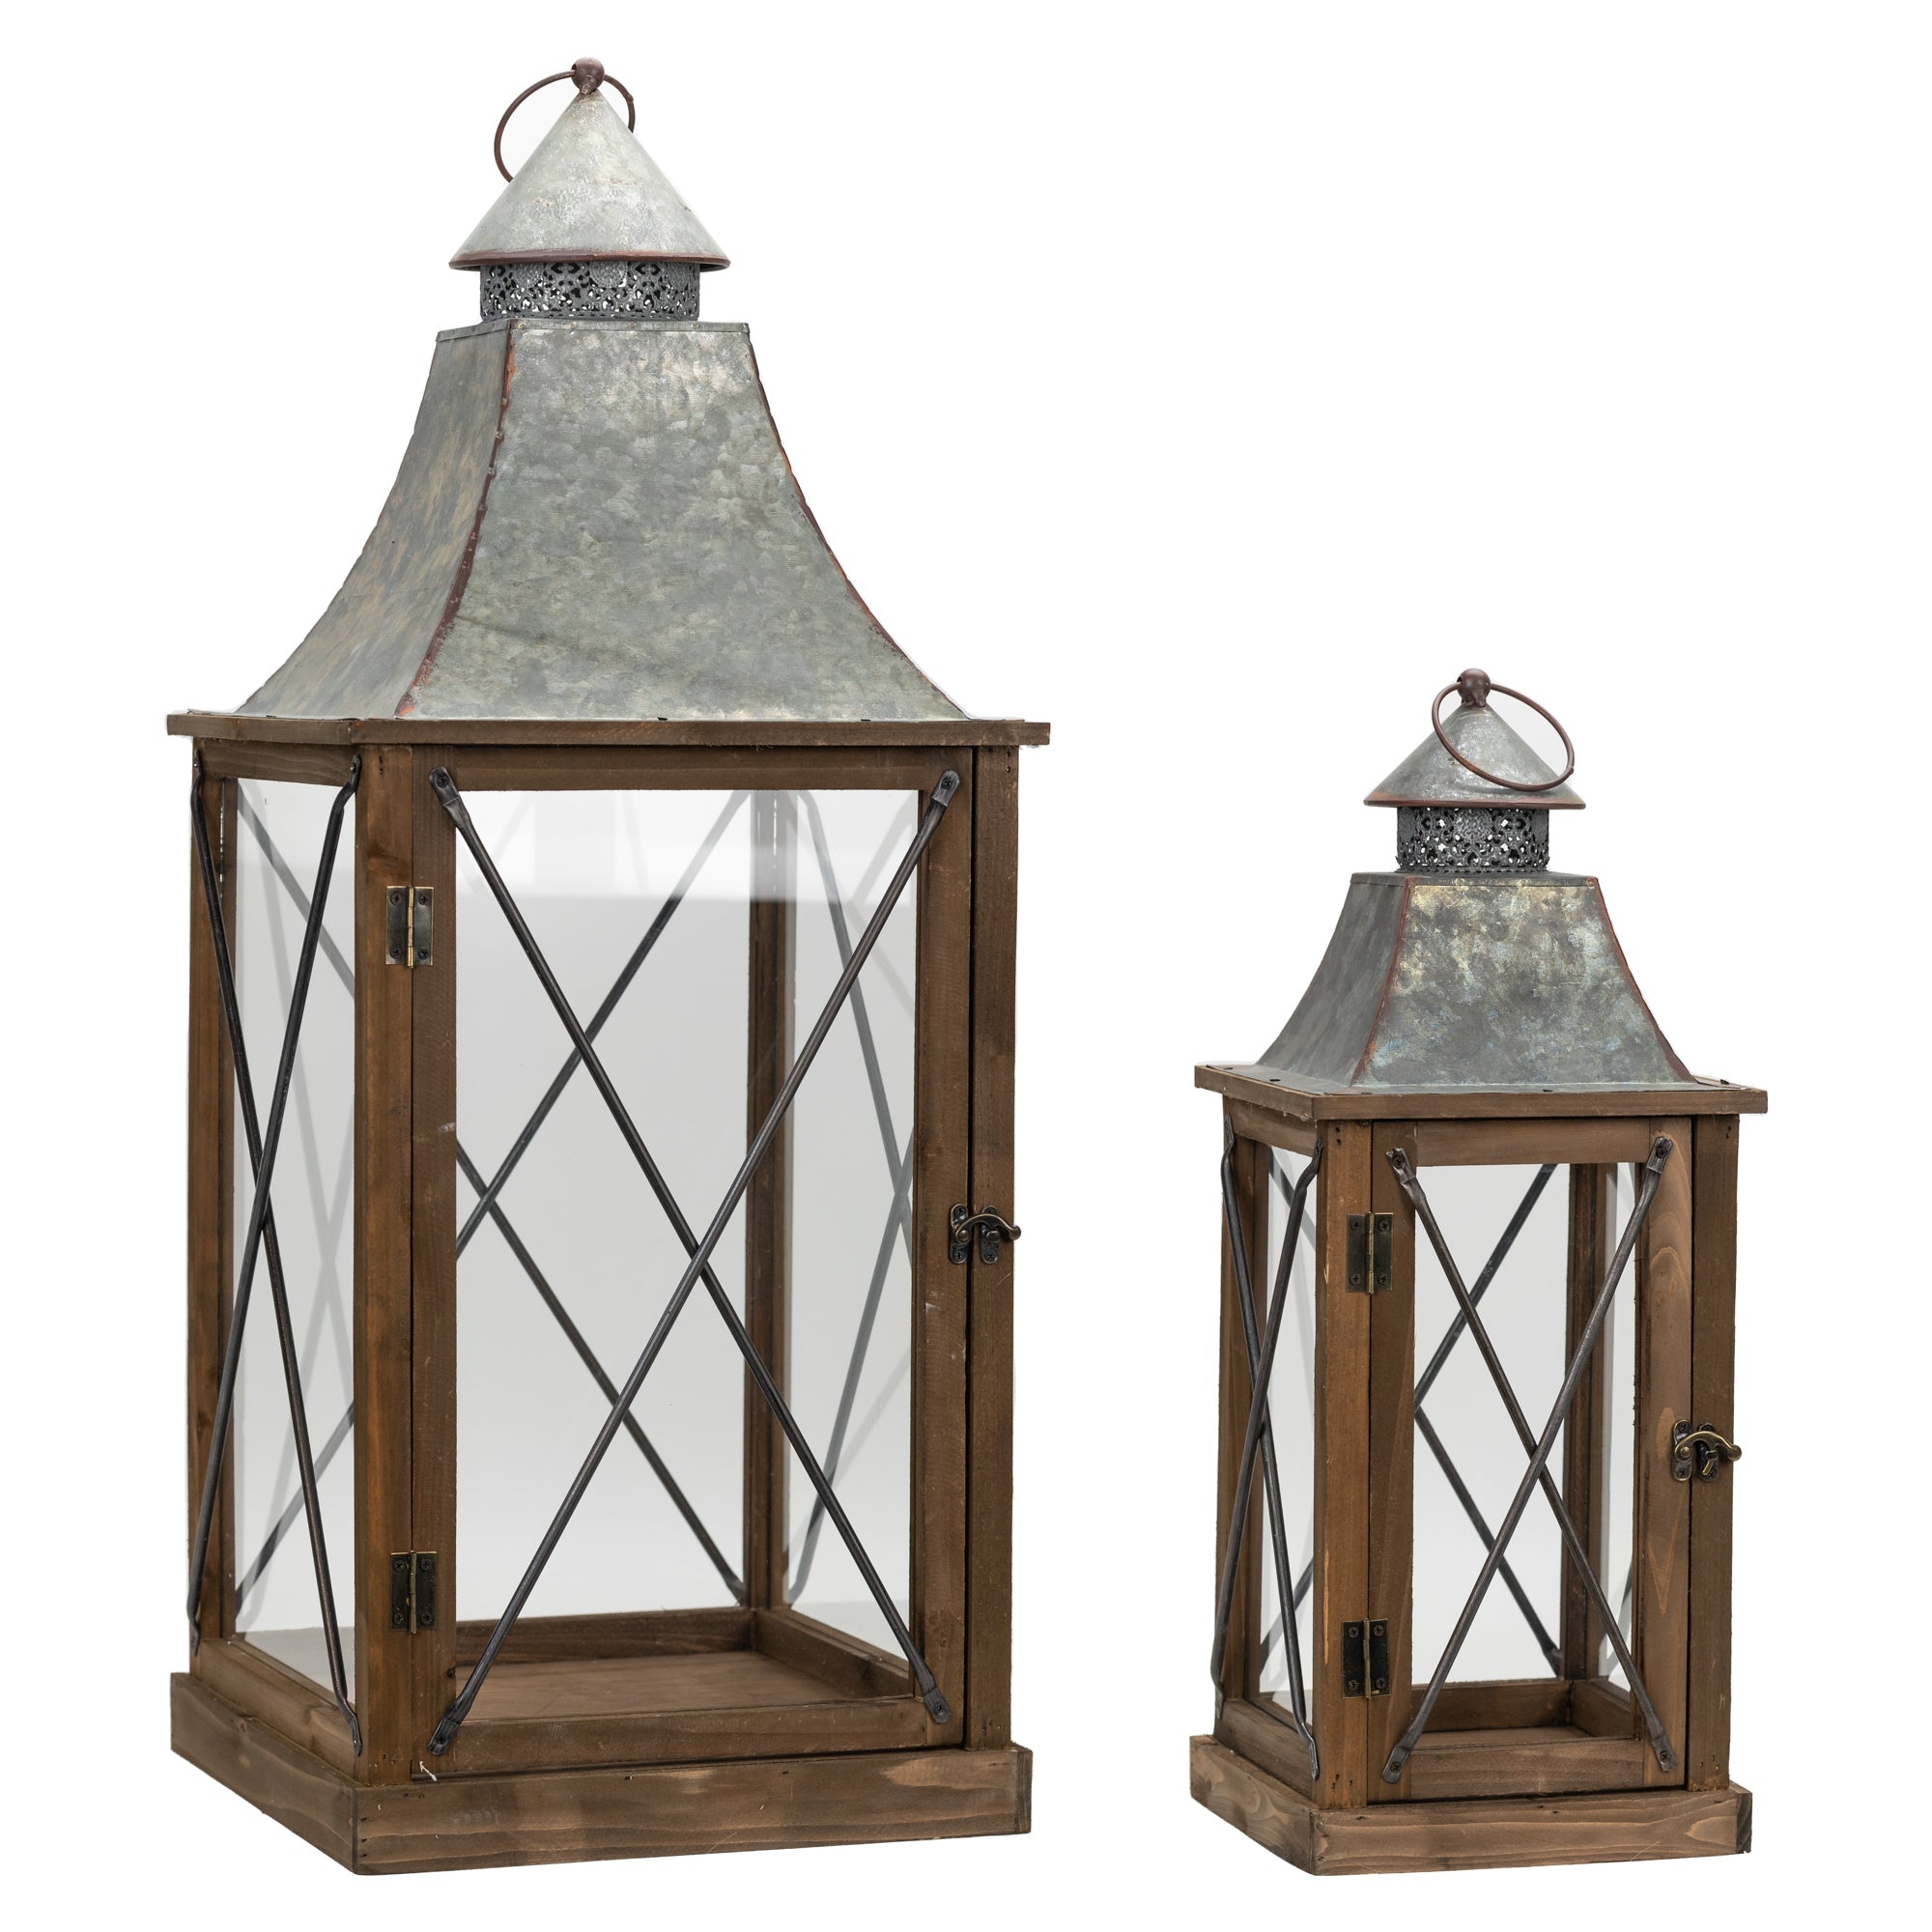 Set-Of-Two-Brown-Flameless-Floor-Lantern-Candle-Holder-Candle-Holders